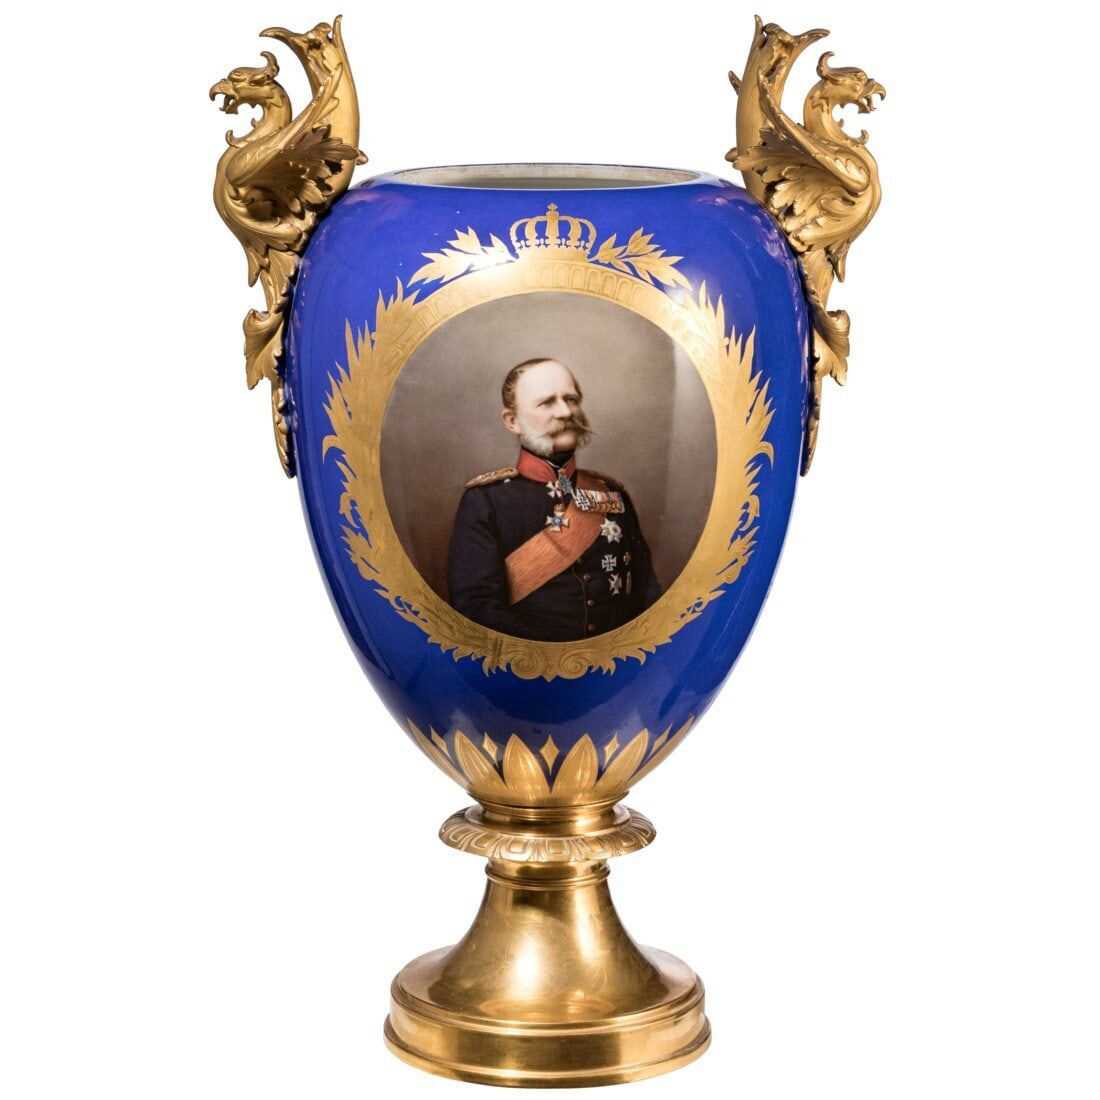 Circa-1850 large KPM porcelain vase with a portrait of King Wilhelm I of Württemberg, estimated at €8,000-€16,000 ($8,560-$17,115) at Hermann Historica on May 7.